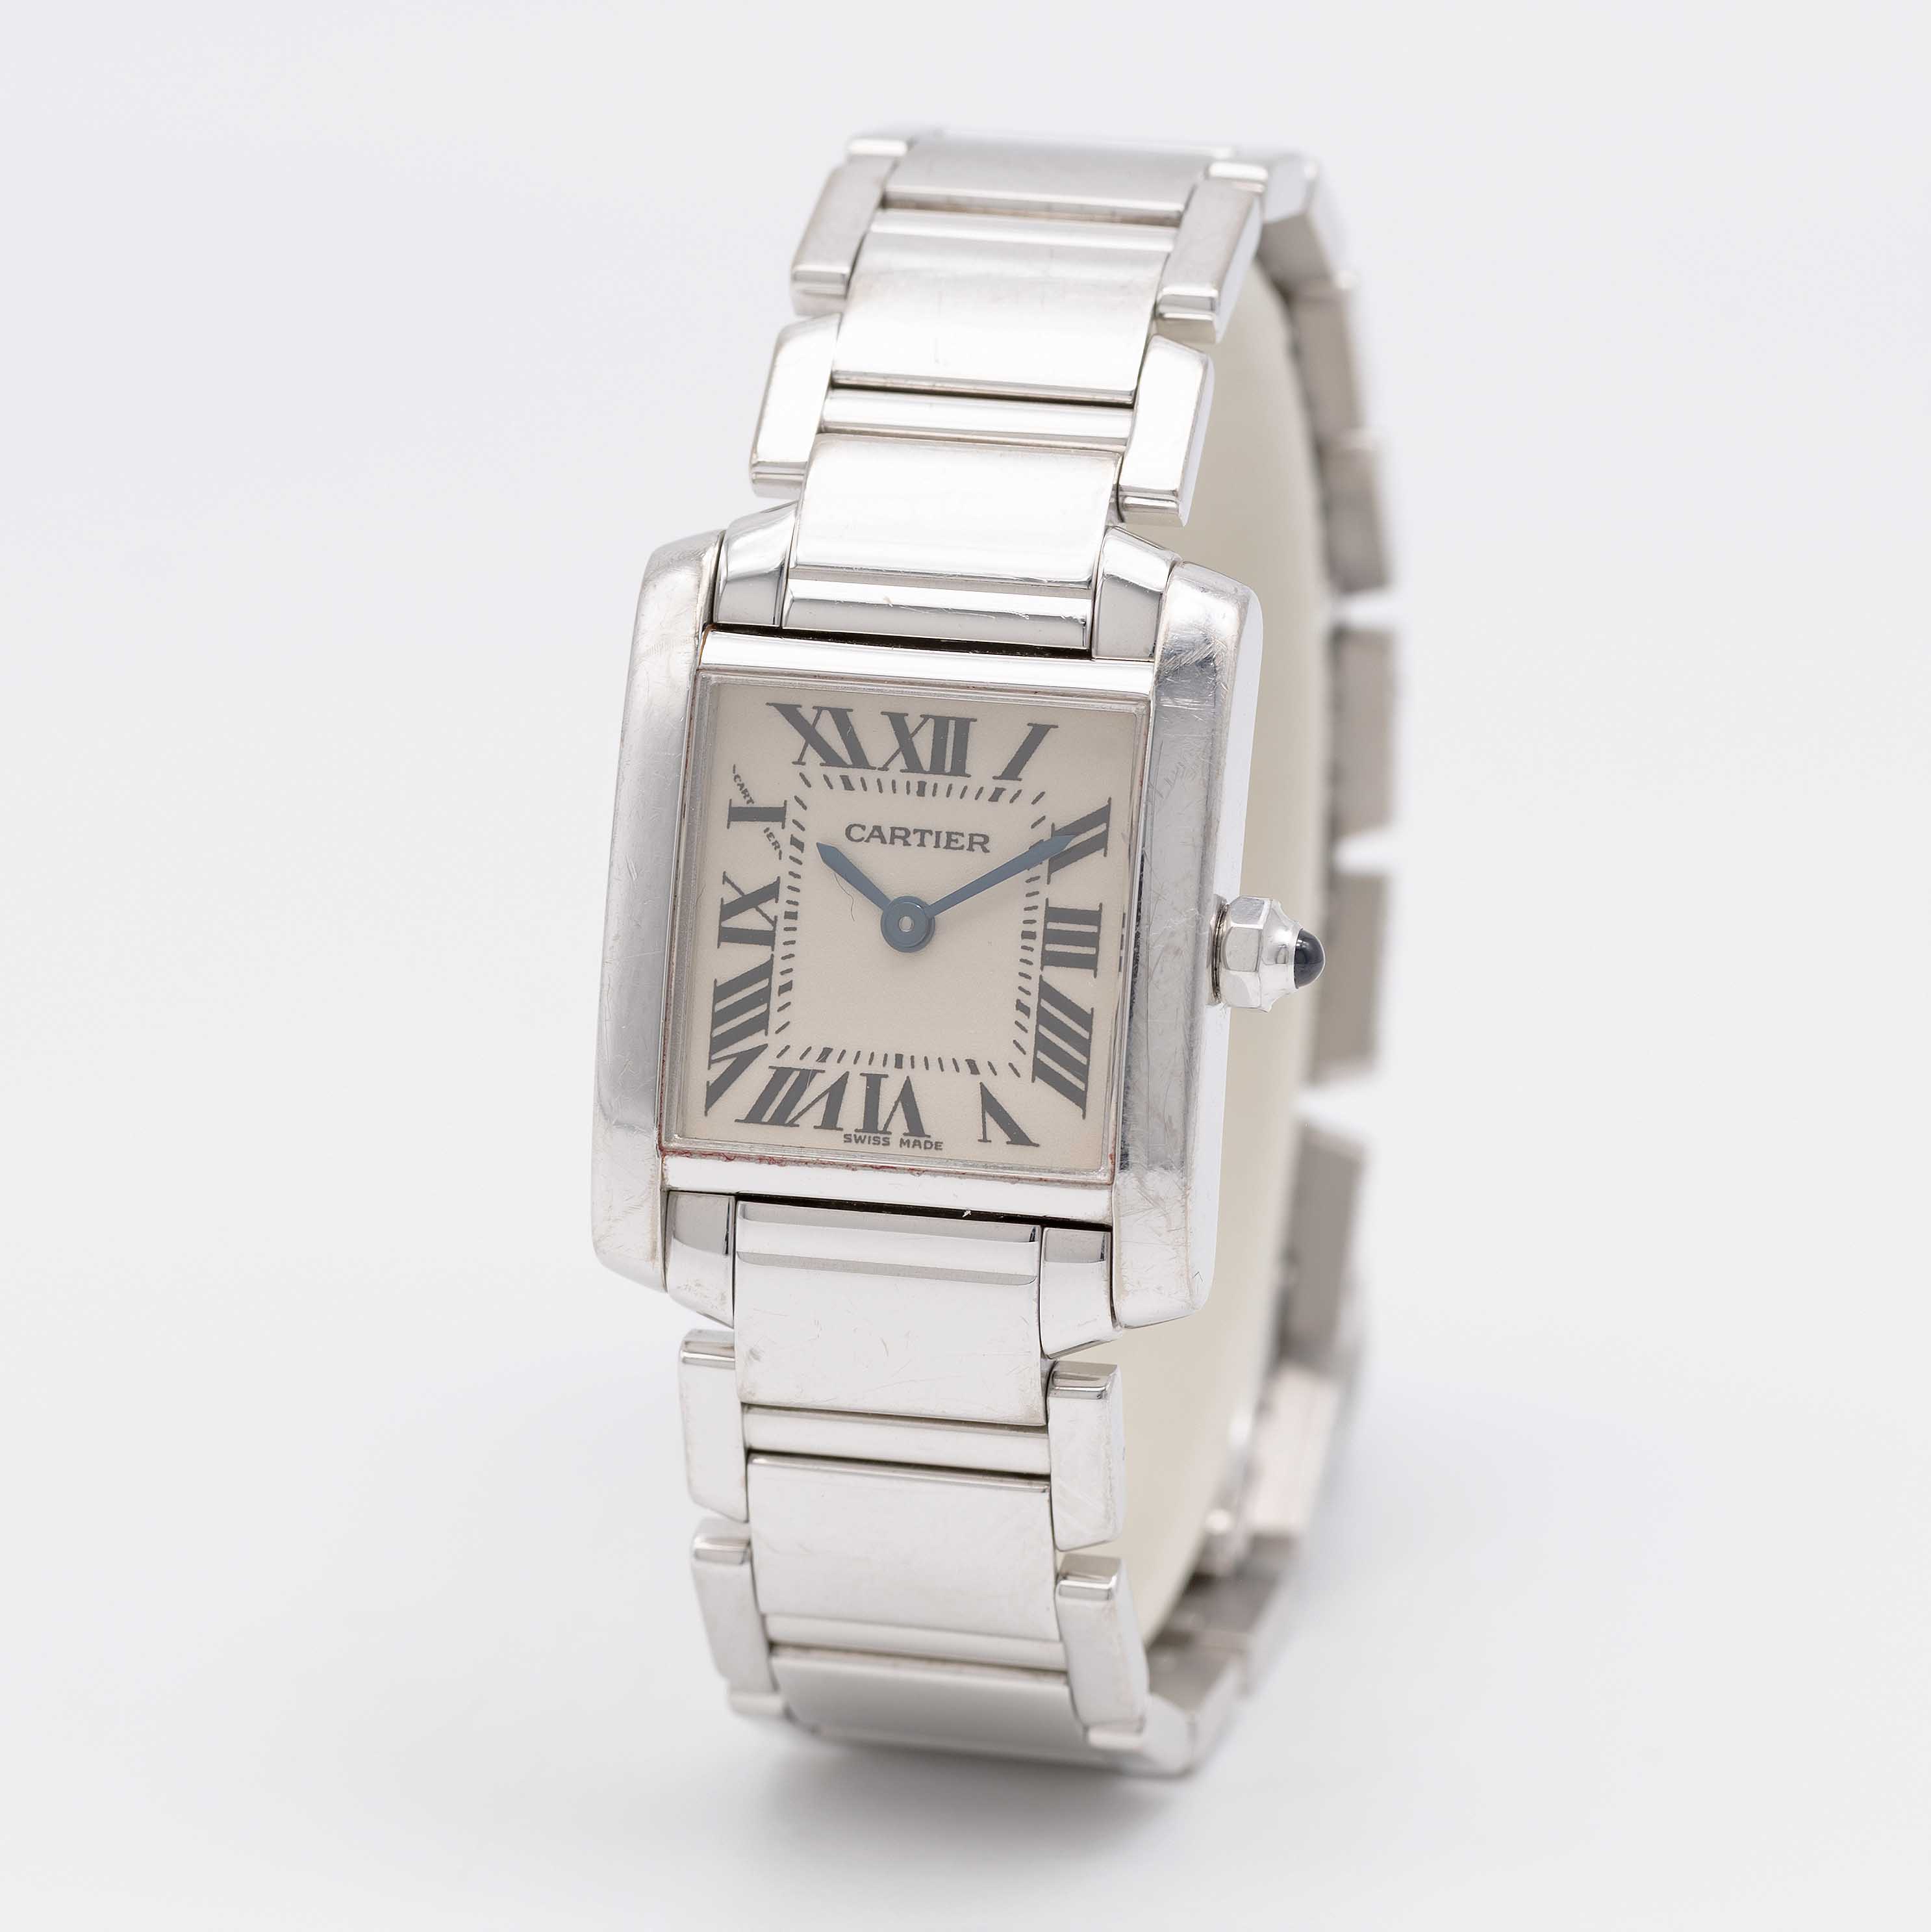 A LADIES 18K SOLID WHITE GOLD CARTIER TANK FRANCAISE BRACELET WATCH CIRCA 2005, REF. 2403 - Image 3 of 9